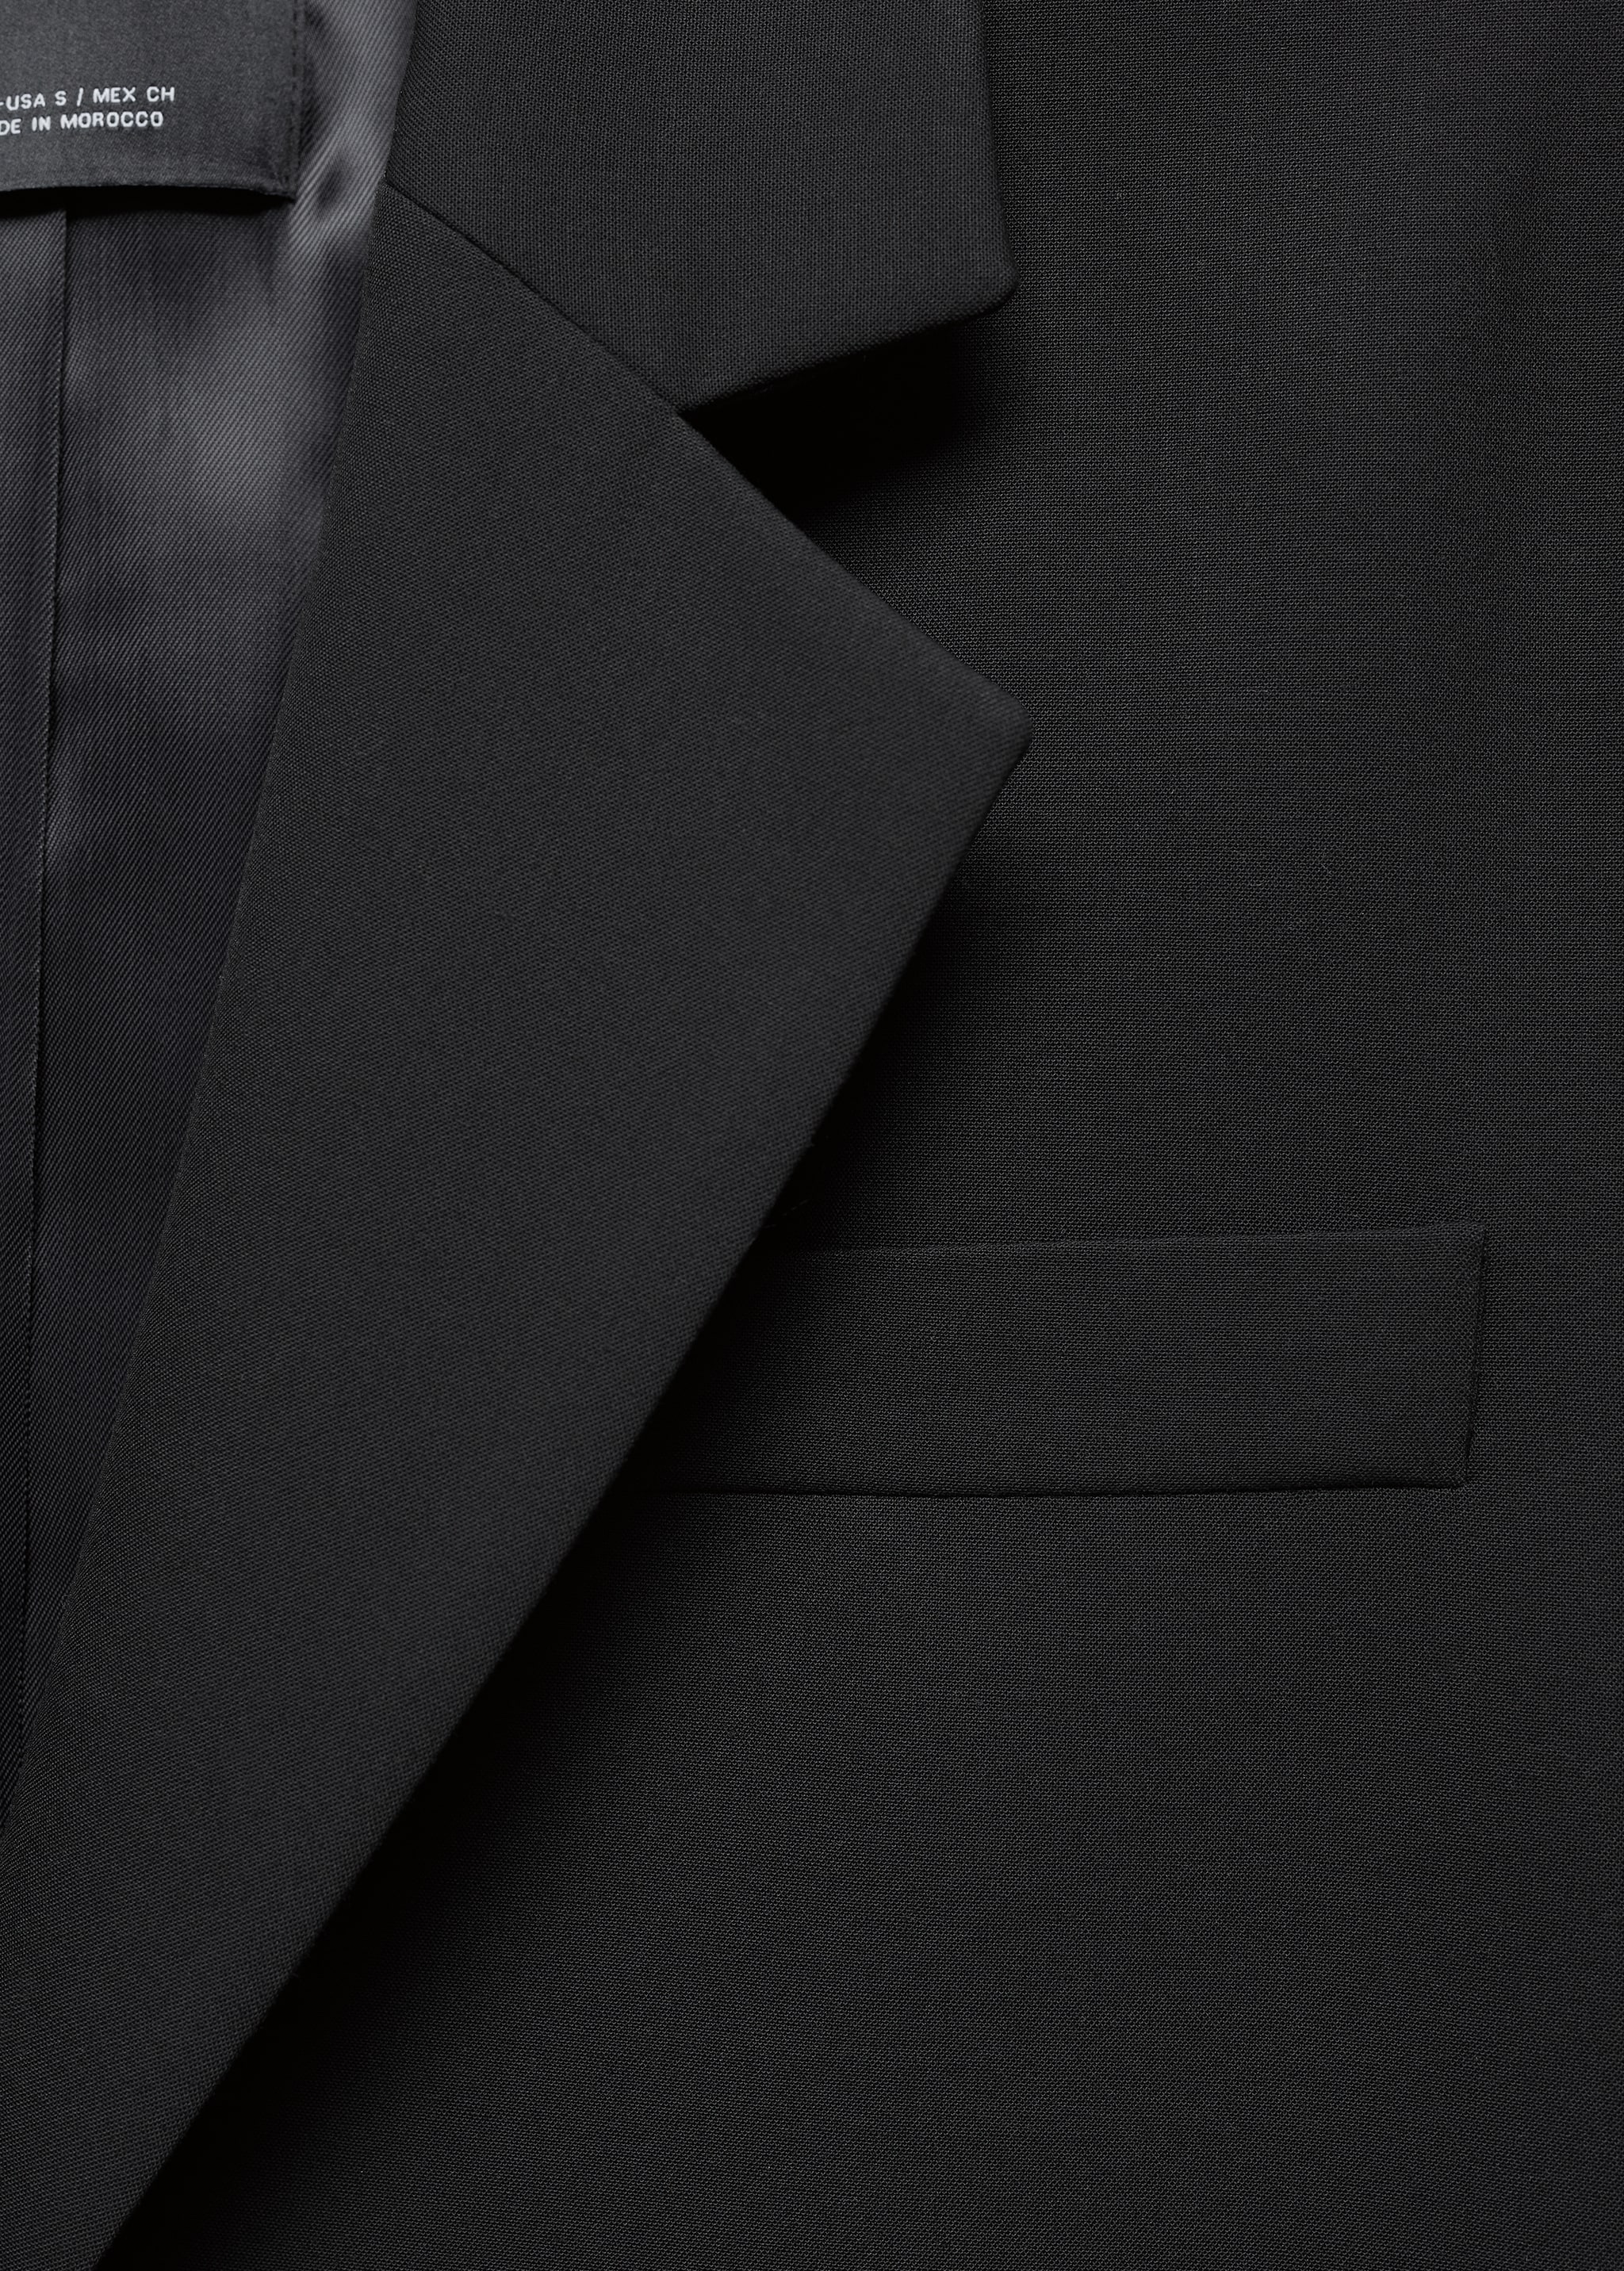 Suit blazer with buttons - Details of the article 8